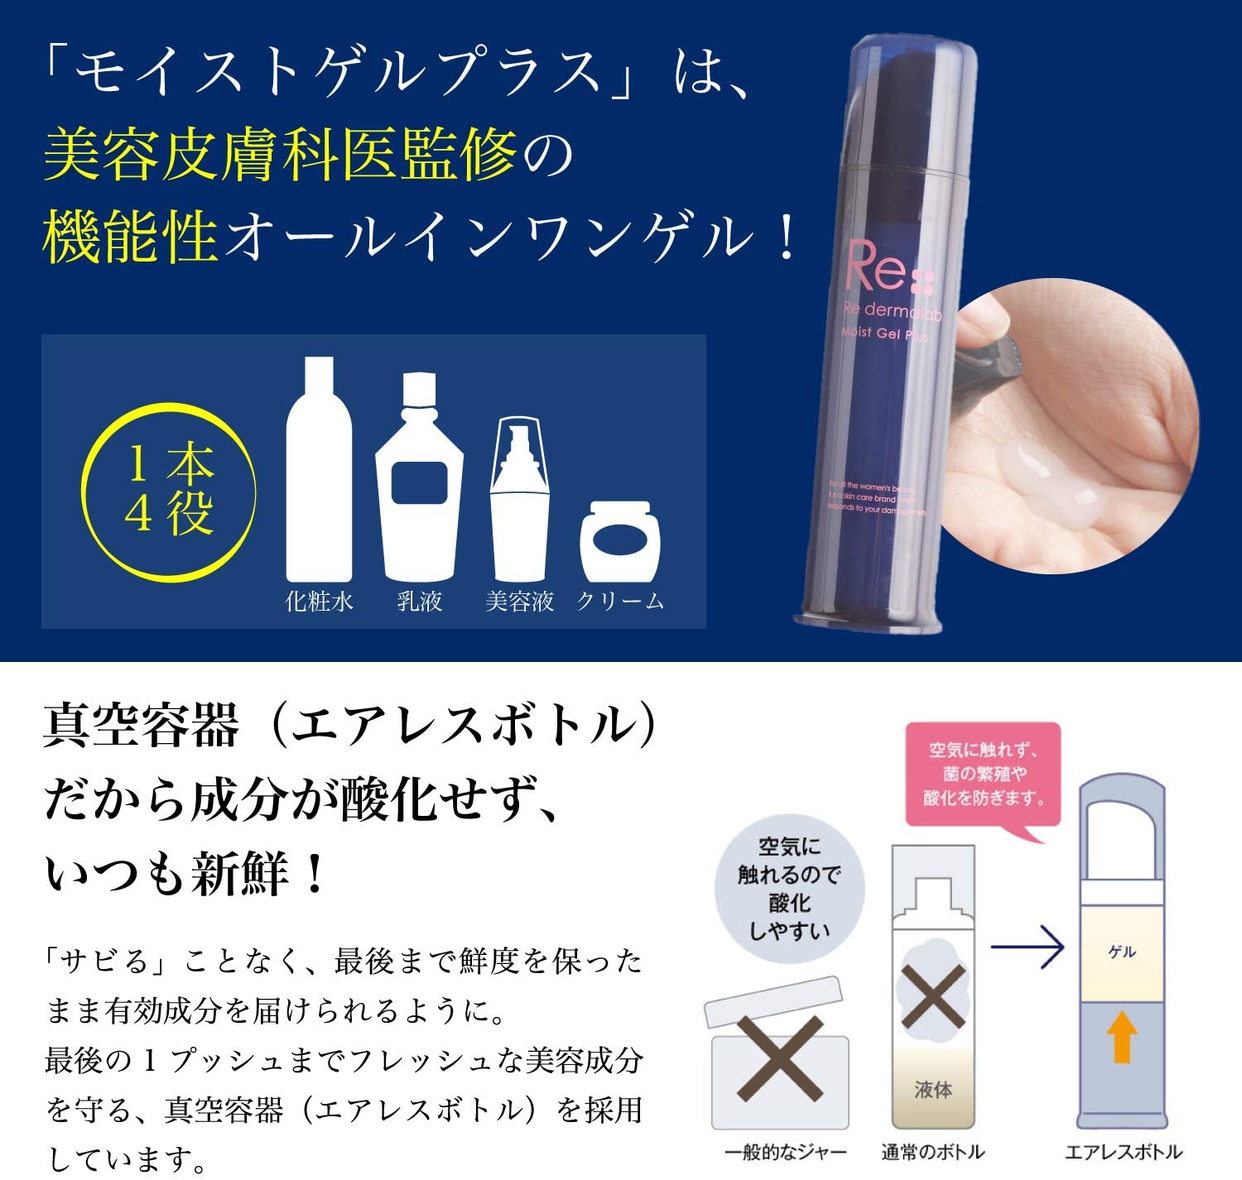 Re dermalab(リ・ダーマラボ) モイストゲルプラスの商品画像サムネ5 